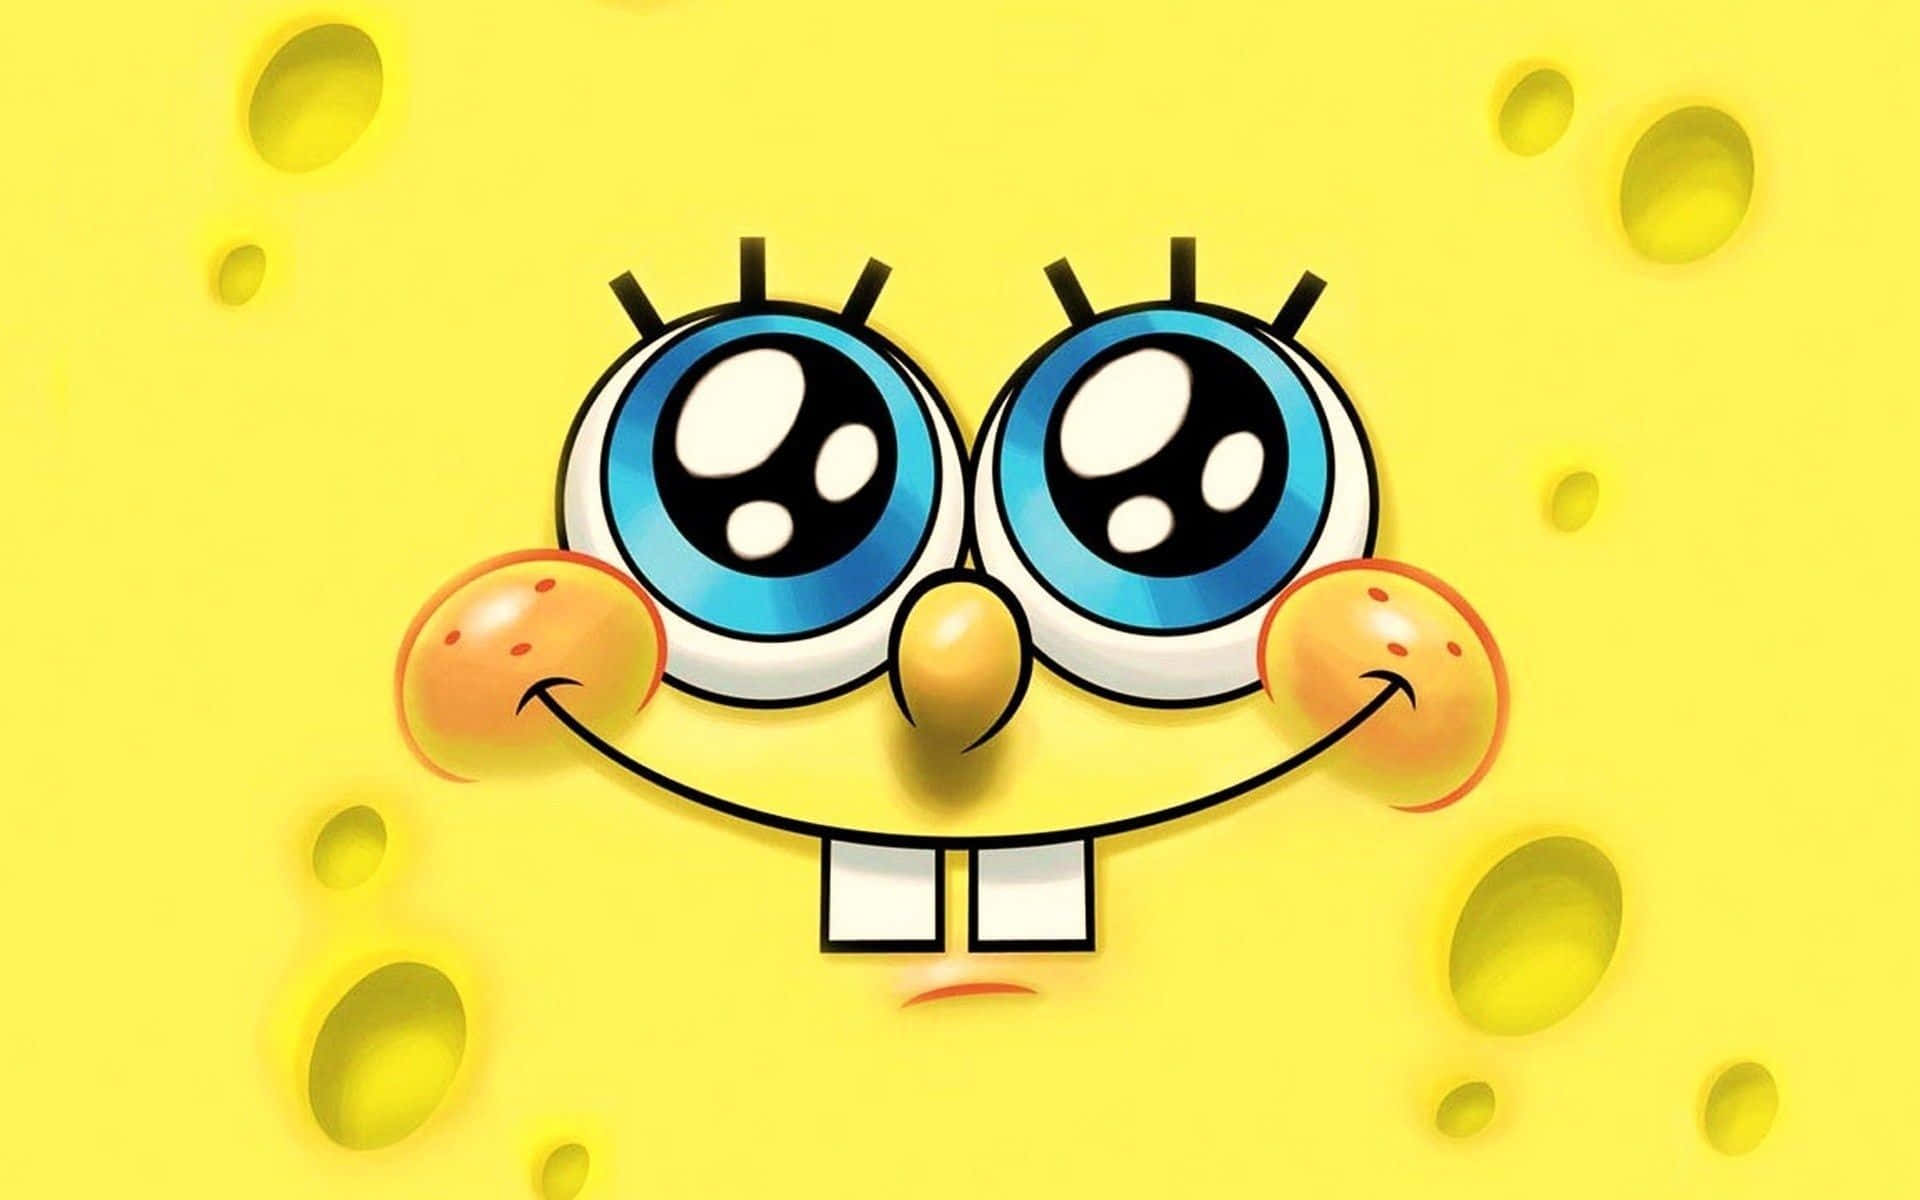 Spongebob brings his signature grin and enthusiasm to your home Wallpaper